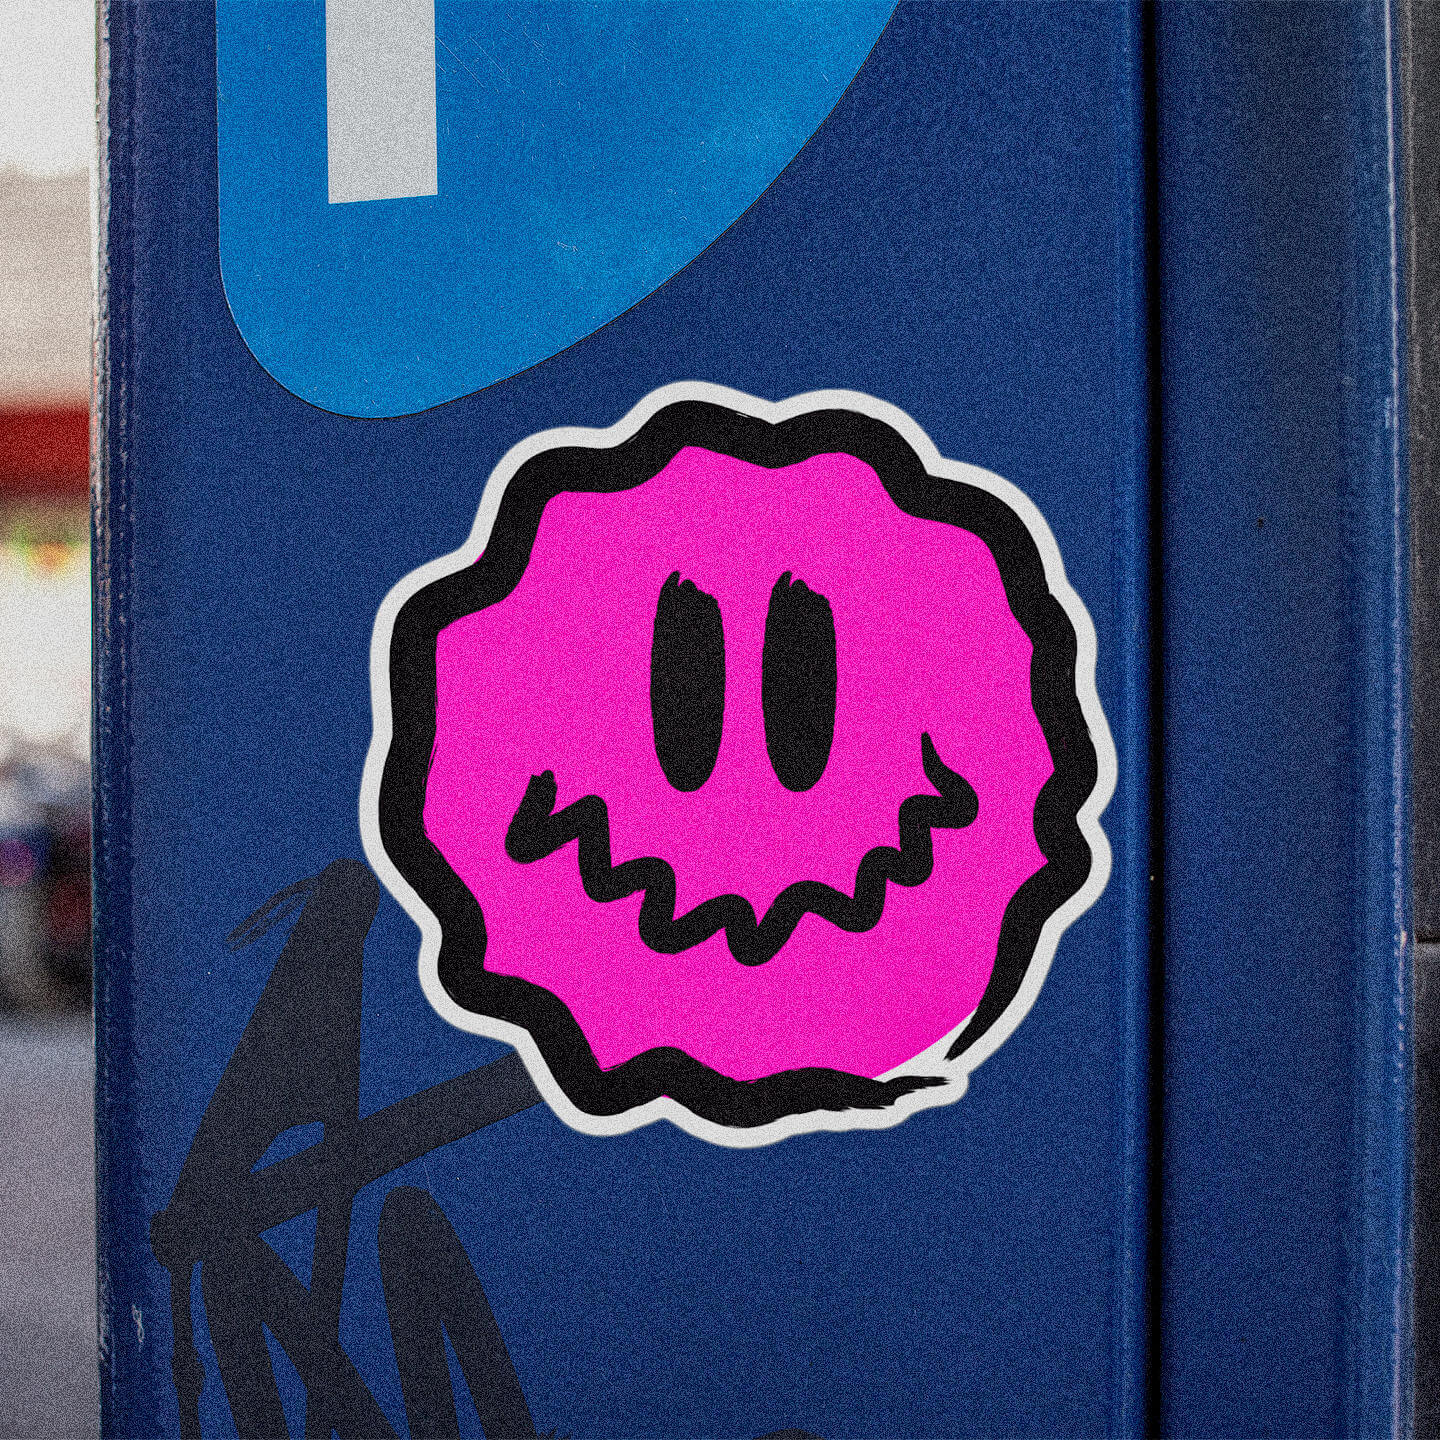 square-pink-antsy-face-round-sticker-on-a-blue-parking-meter.